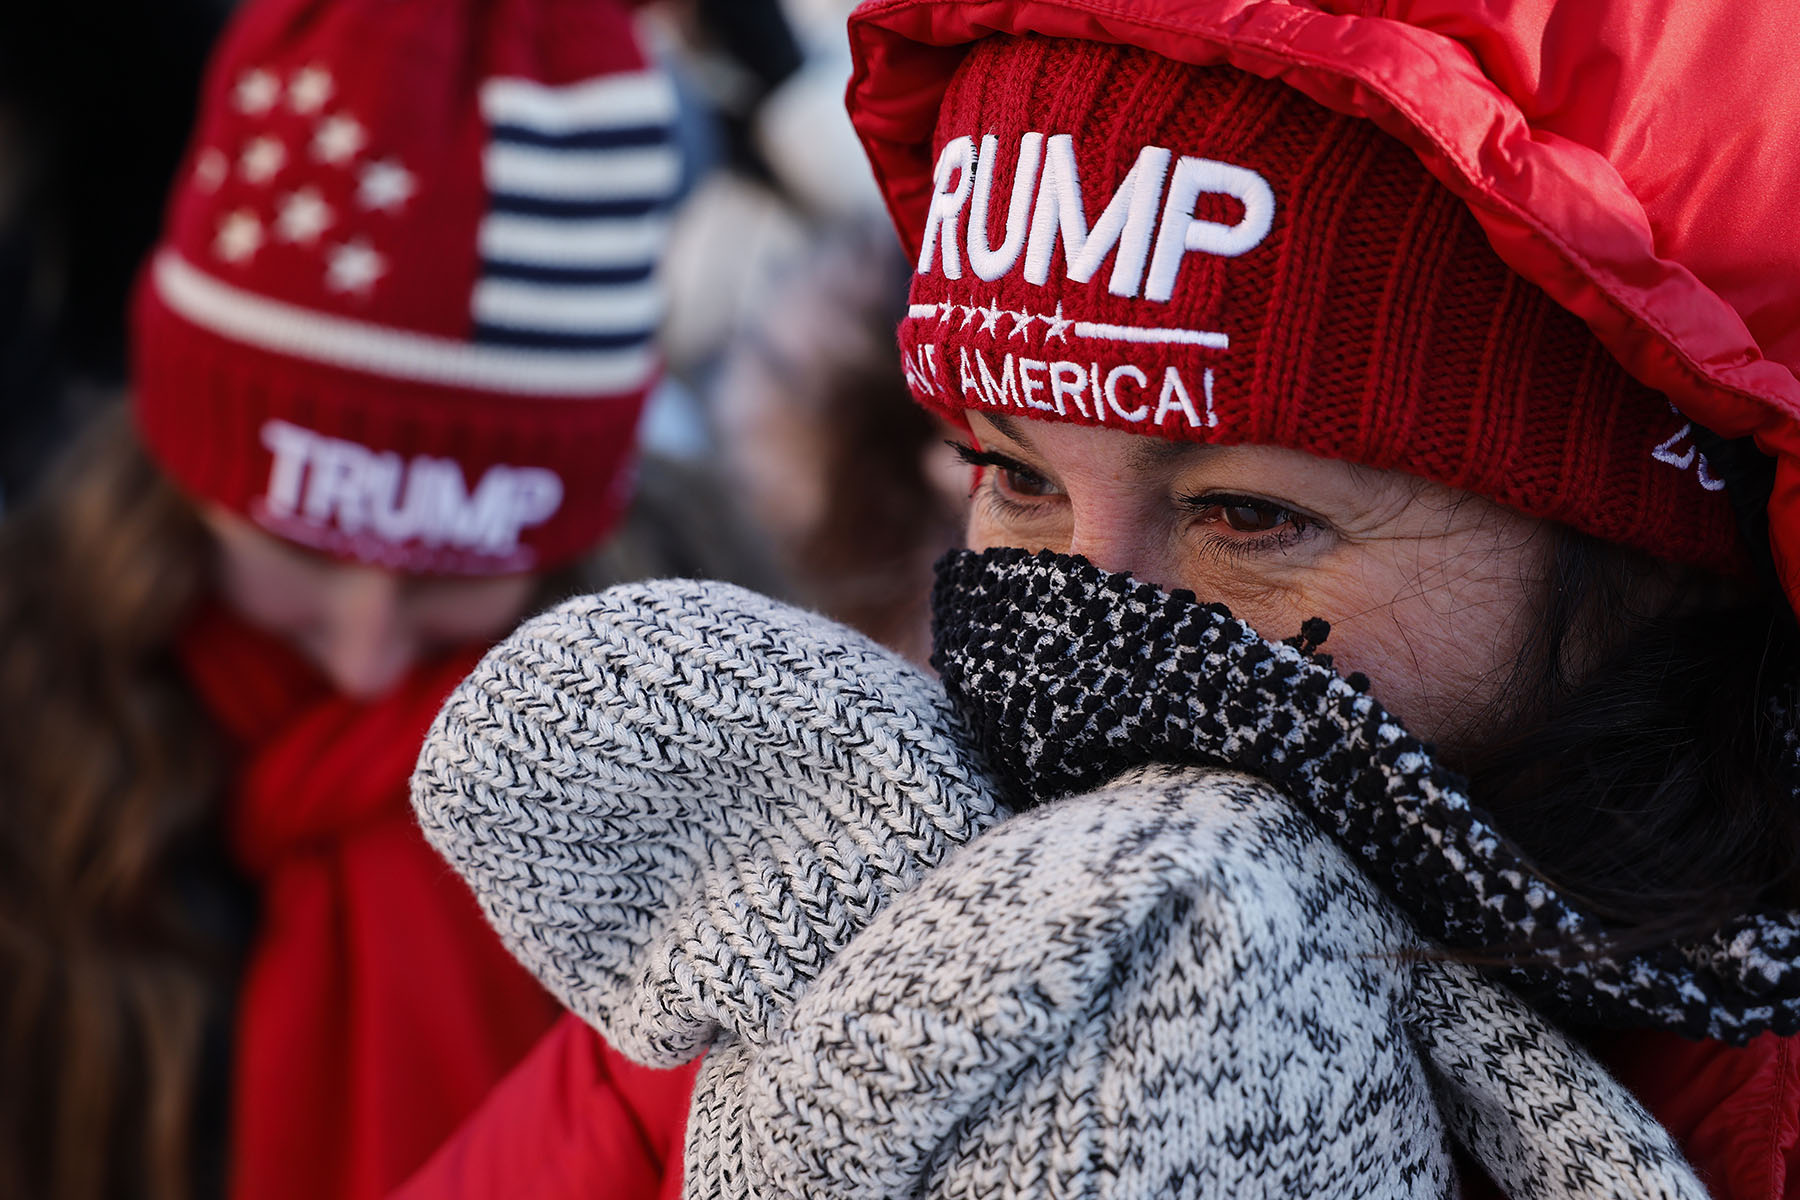 Supporters of former President Donald Trump bundle up against the cold while waiting outside the Rochester Opera House ahead of a campaign rally.